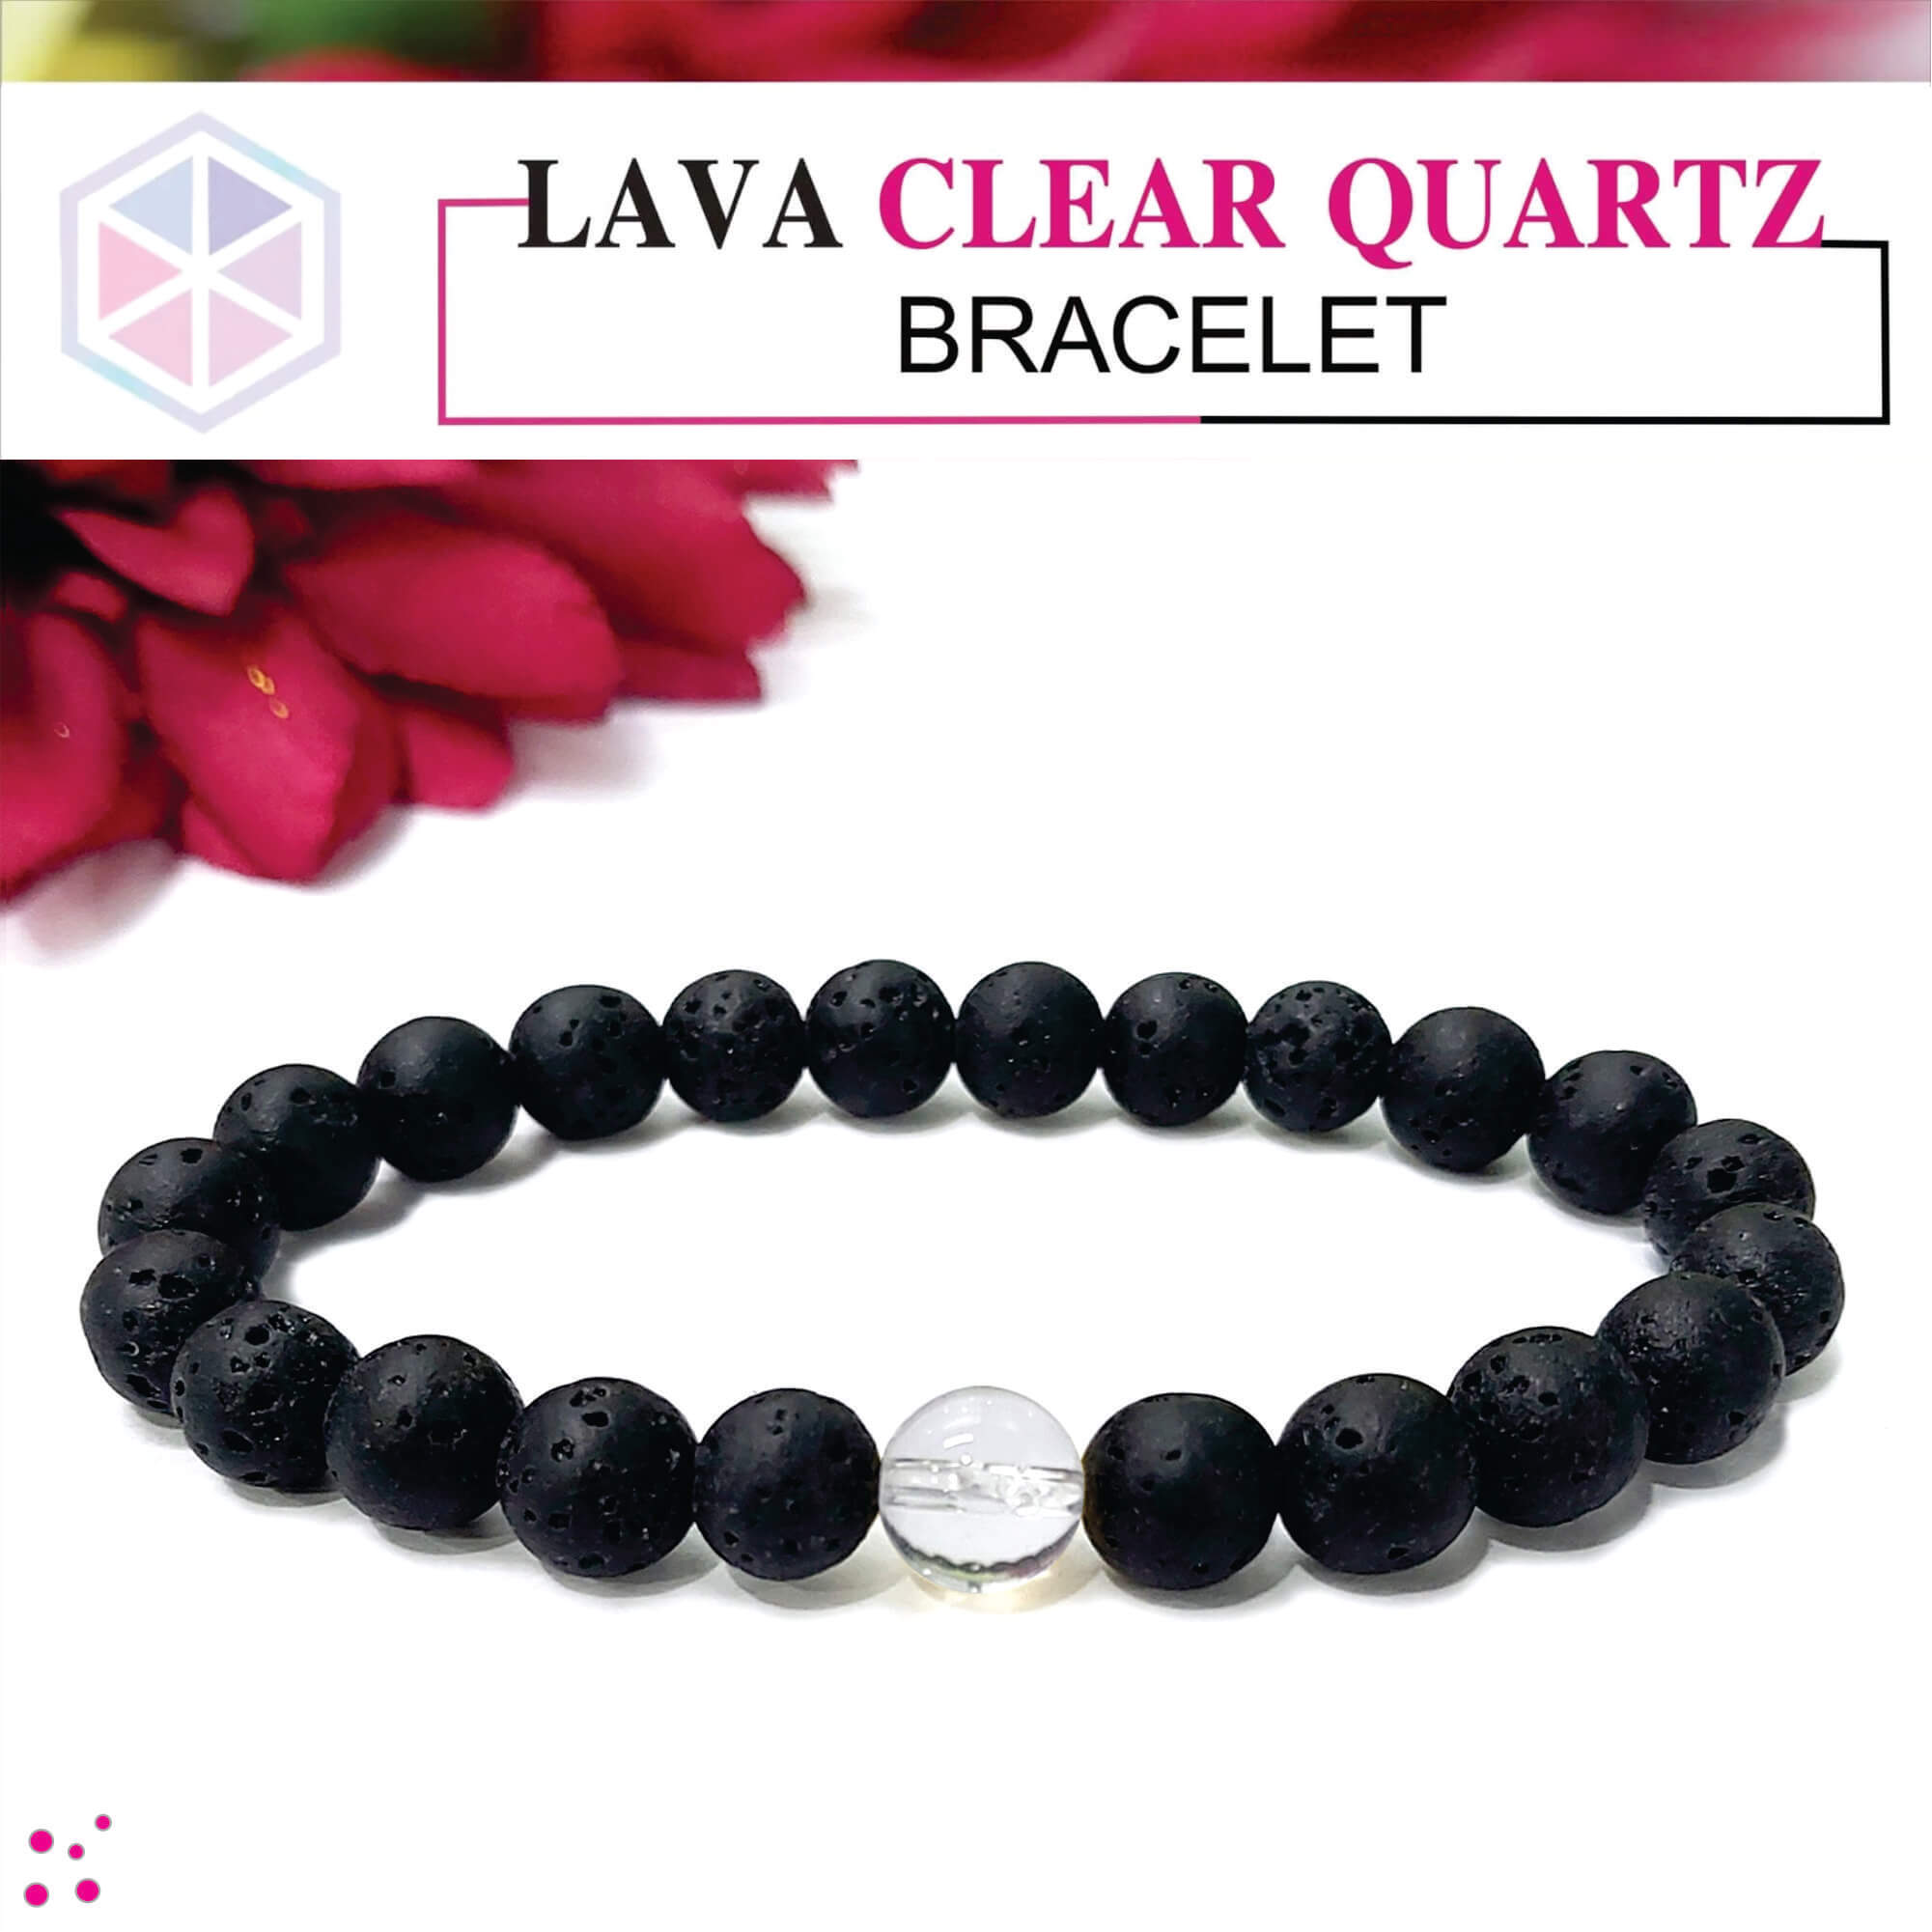 Natural Clear Quartz 8 mm Faceted Bead Crystal Stone Bracelets